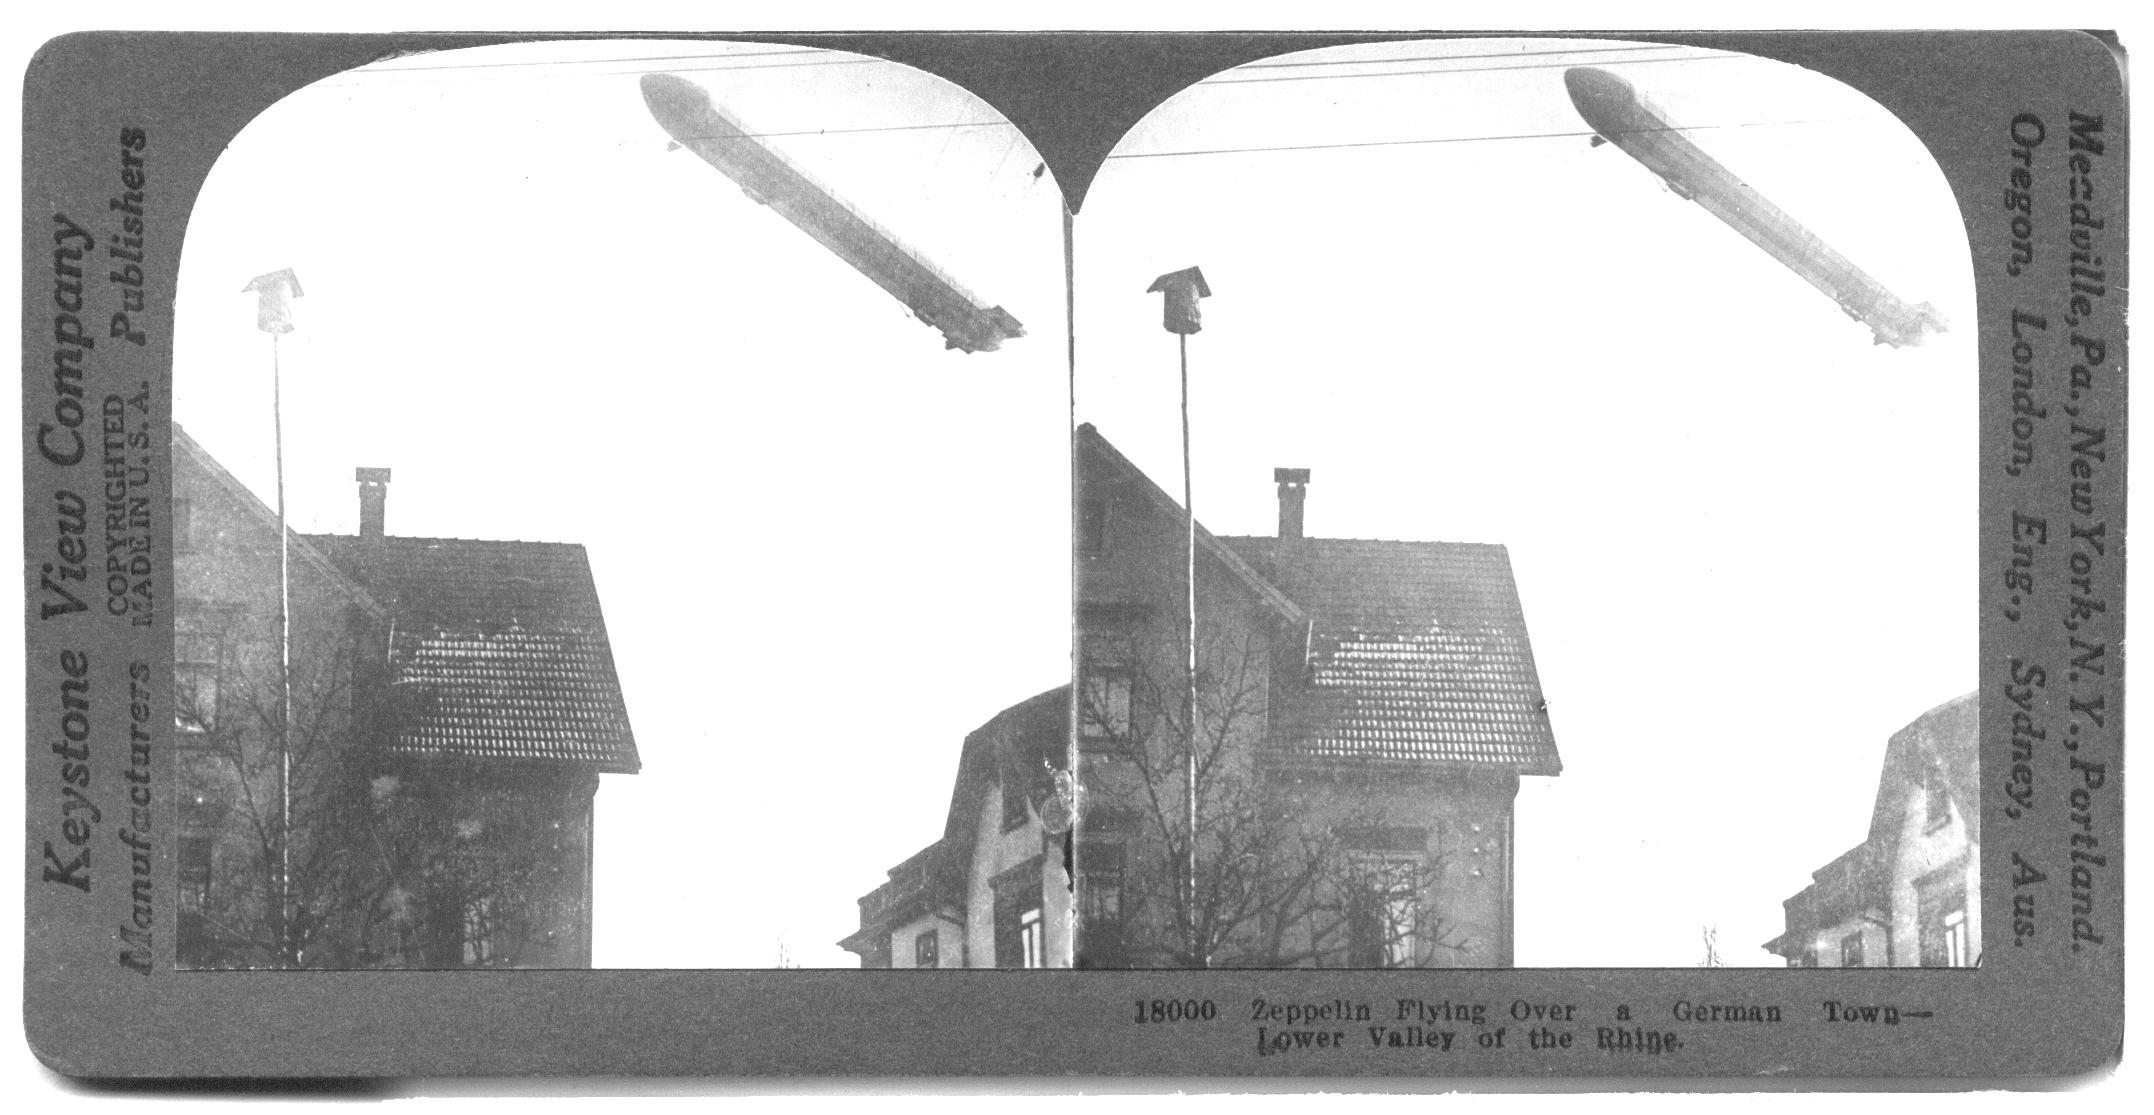 Zeppelin Flying Over a German Town--Lower Valley of the Rhine